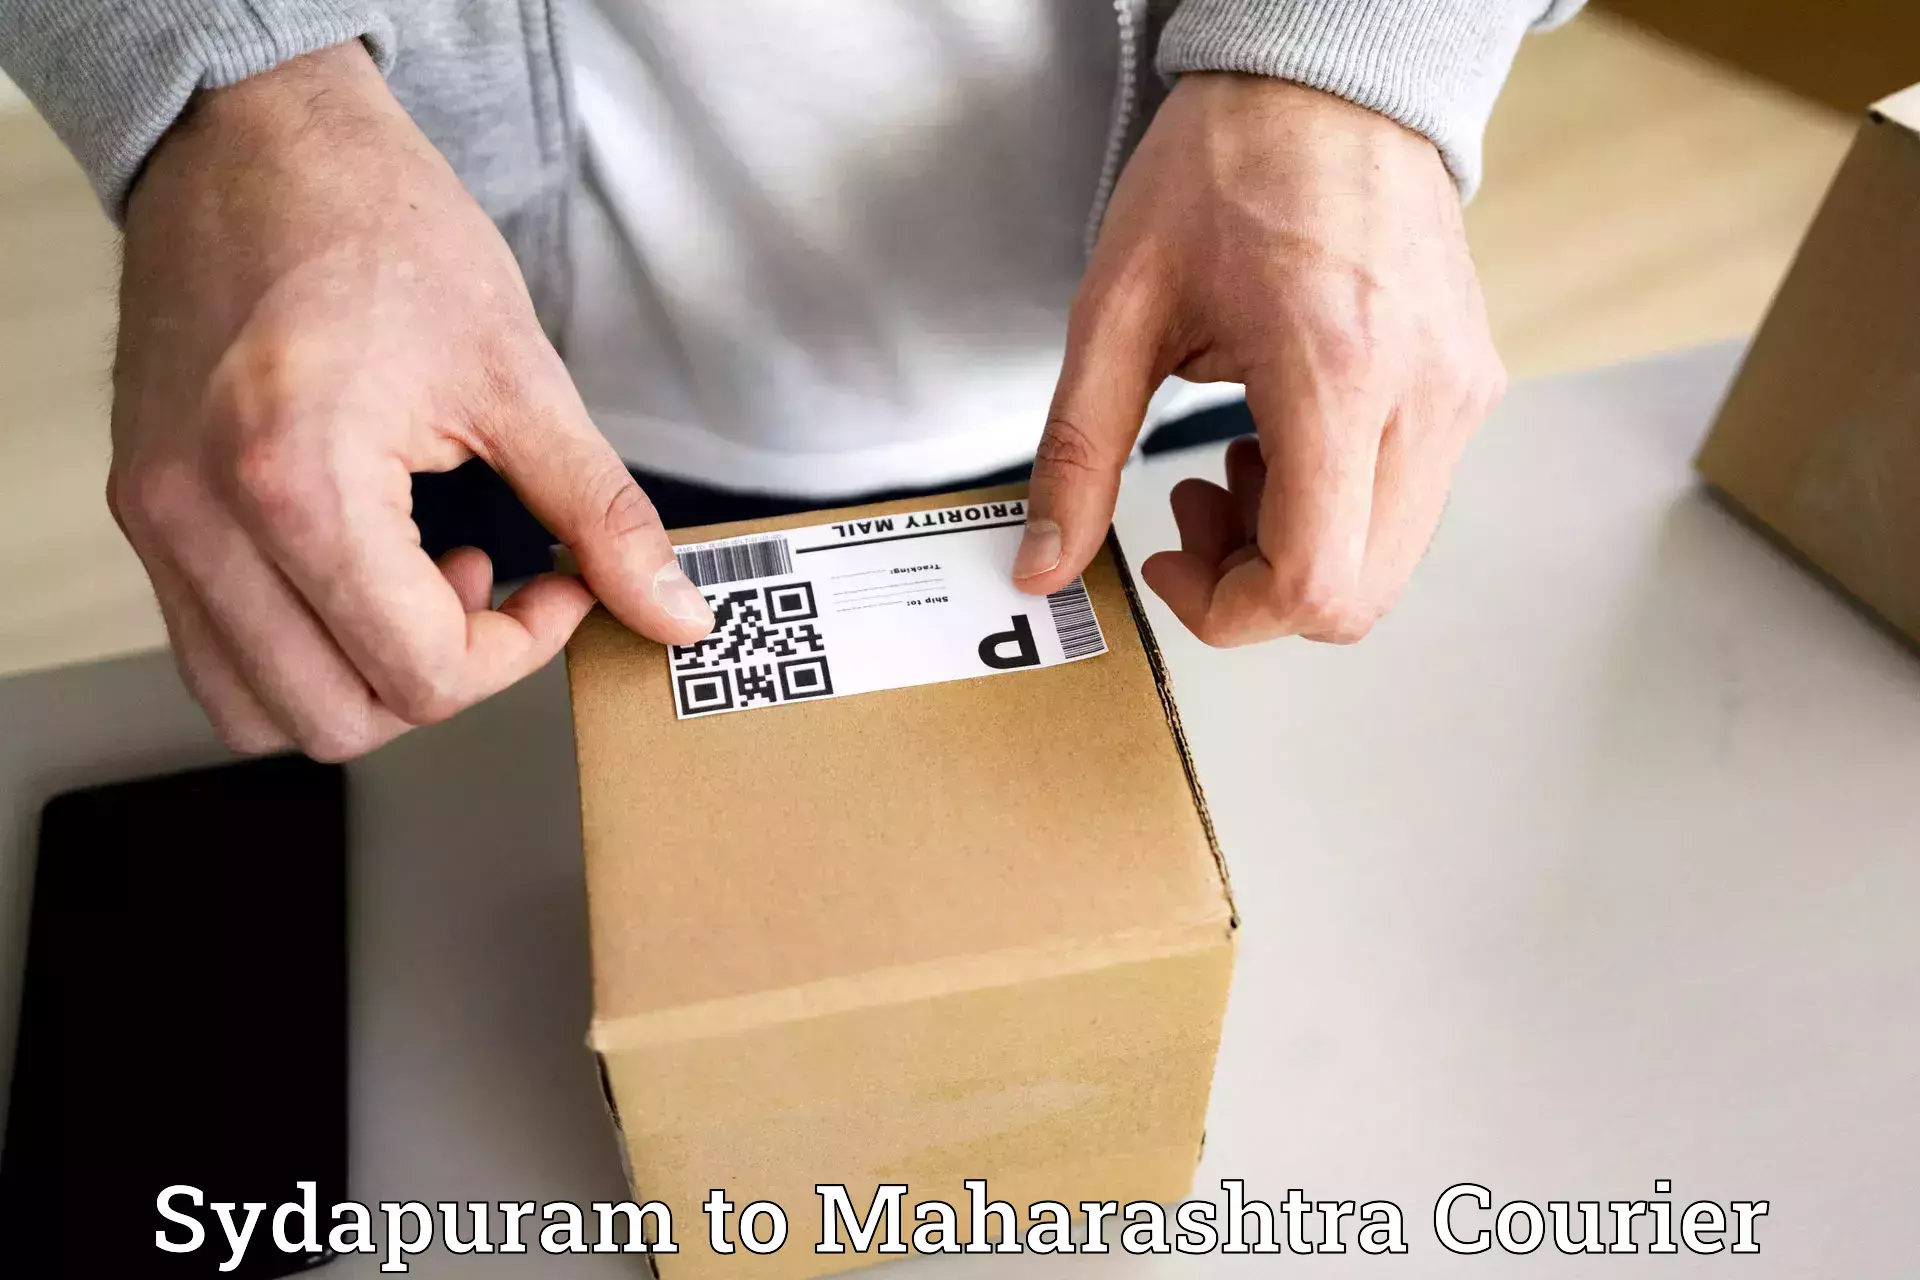 Same-day delivery options Sydapuram to Ulhasnagar